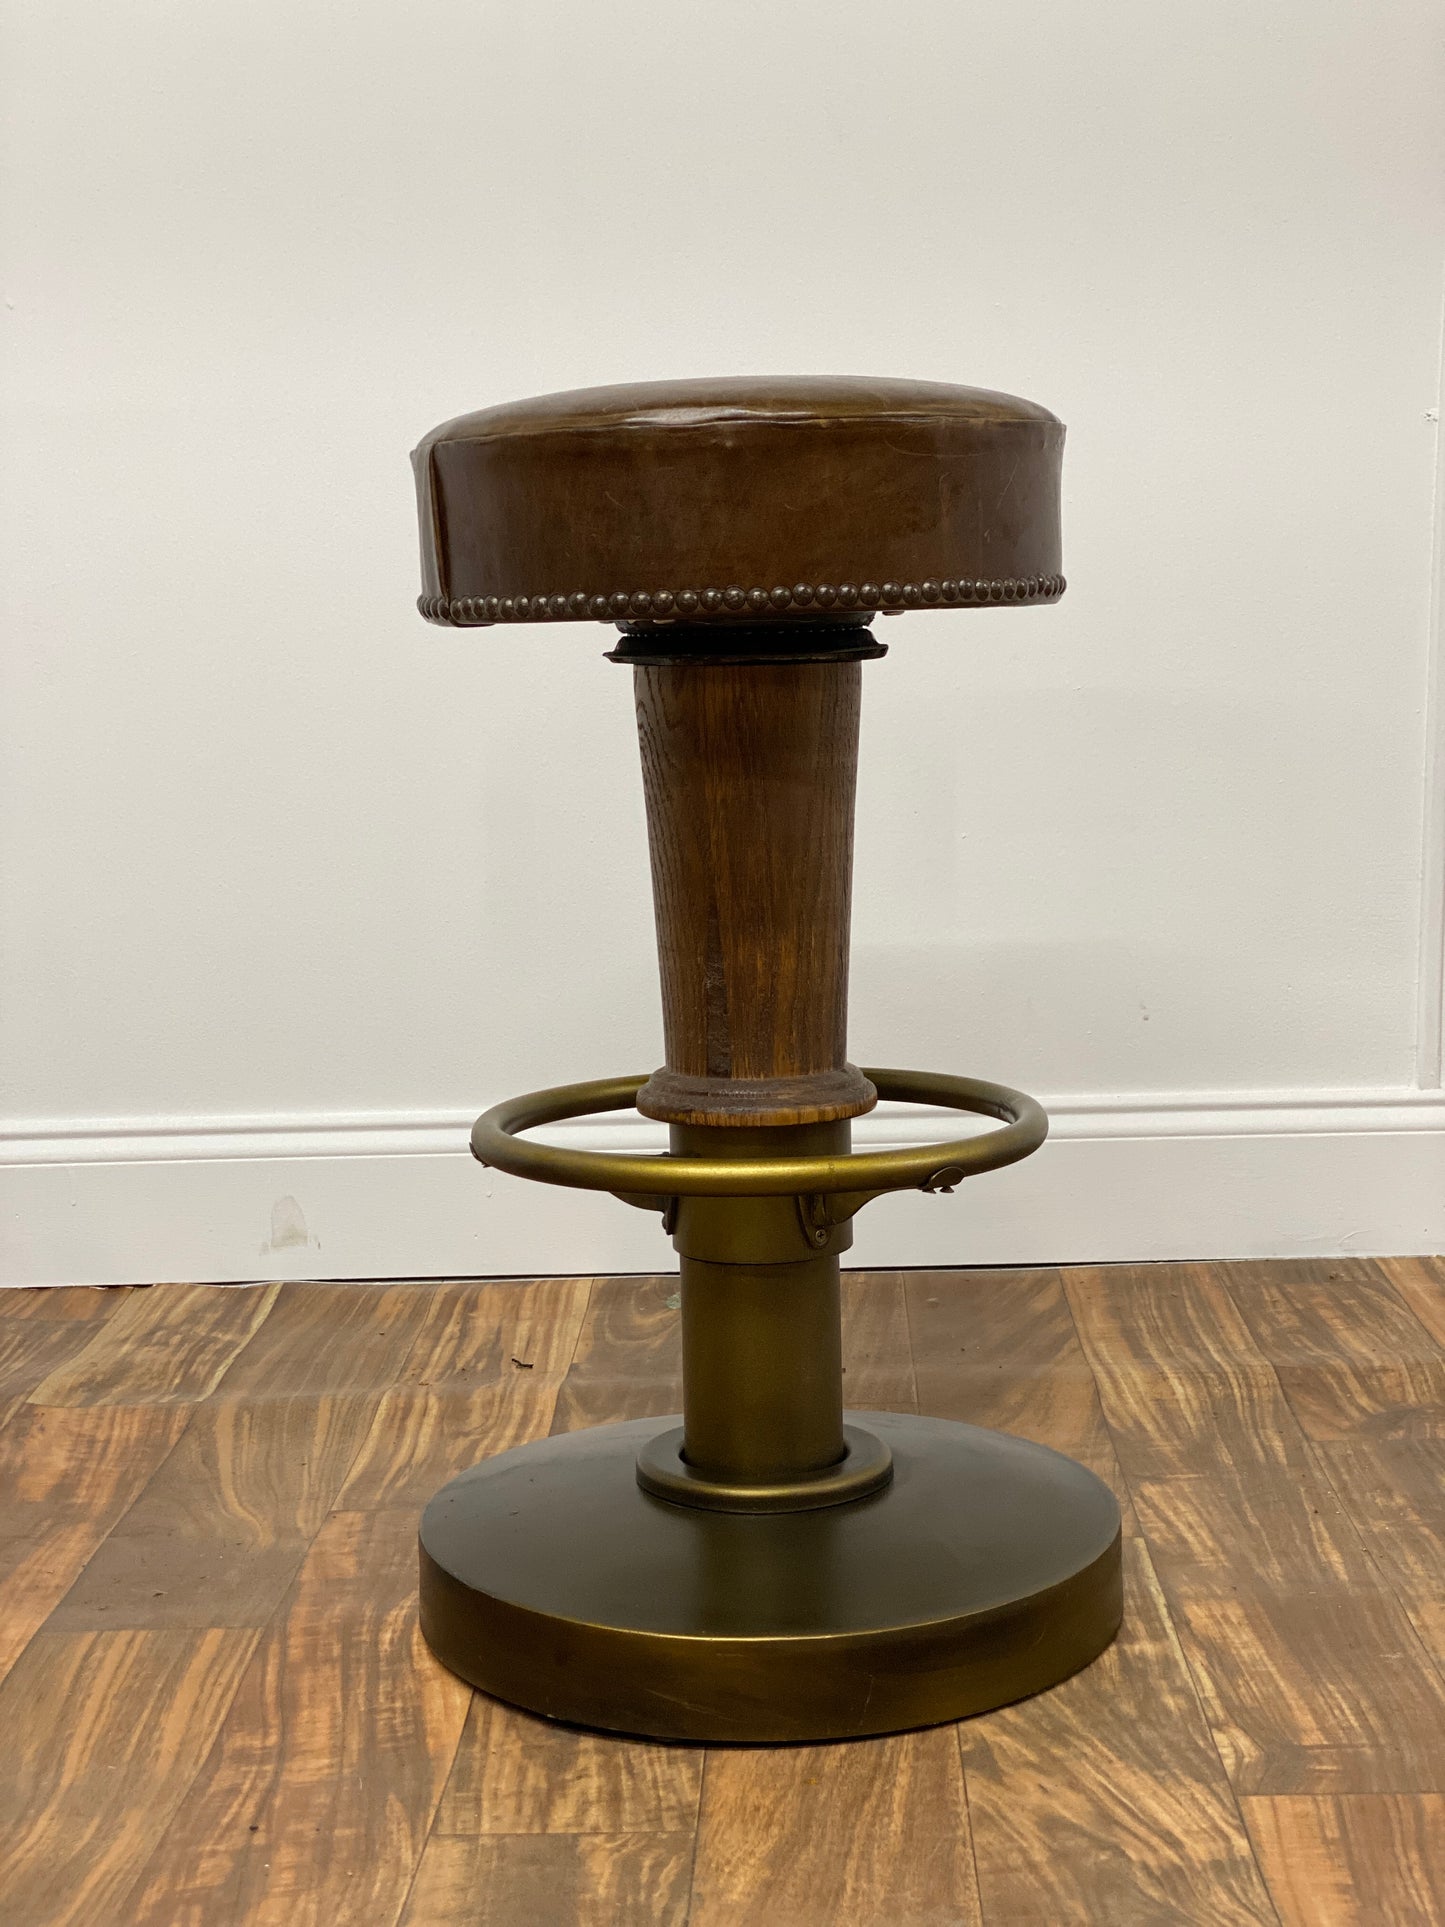 BROWN LEATHER BAR STOOL WITH RIVETS